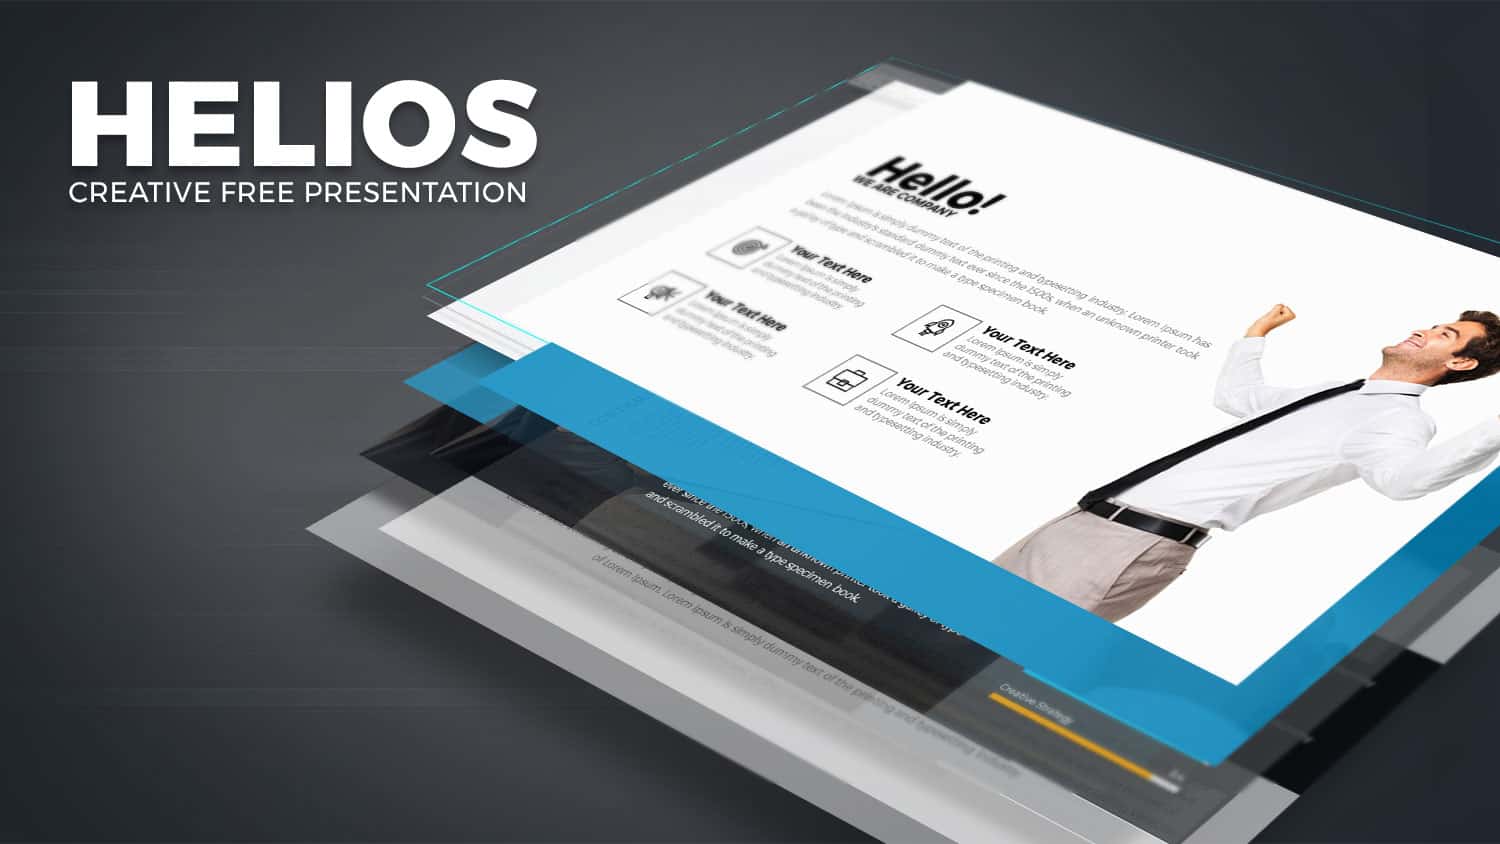 HELIOS free team building PowerPoint templates